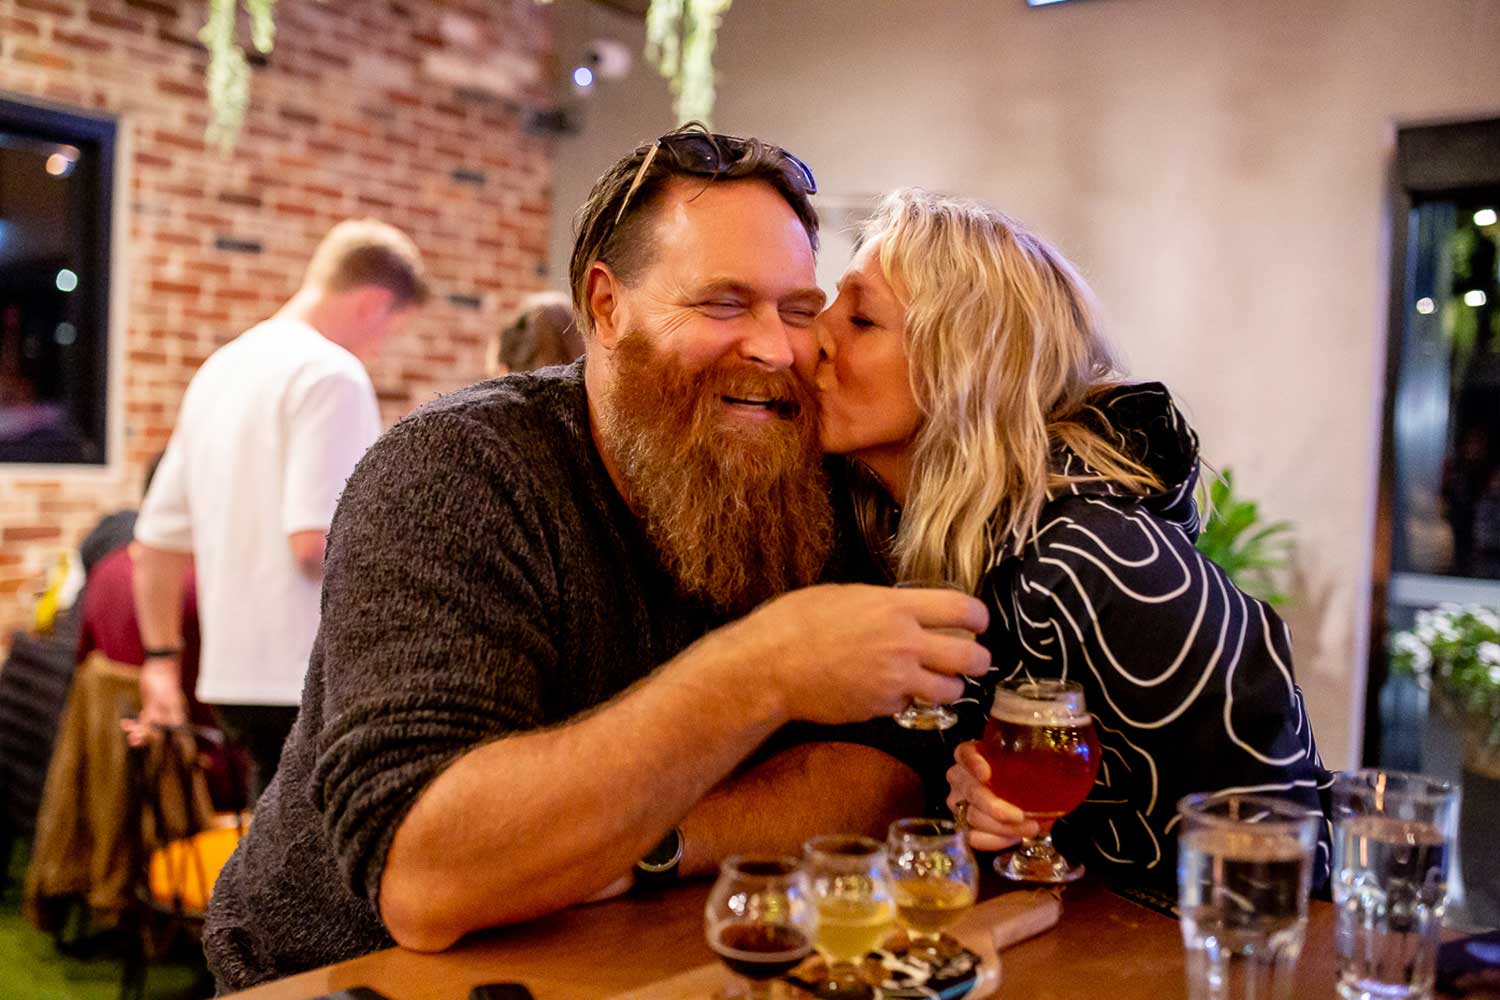 Woman kissing man on the cheek at a craft brewery